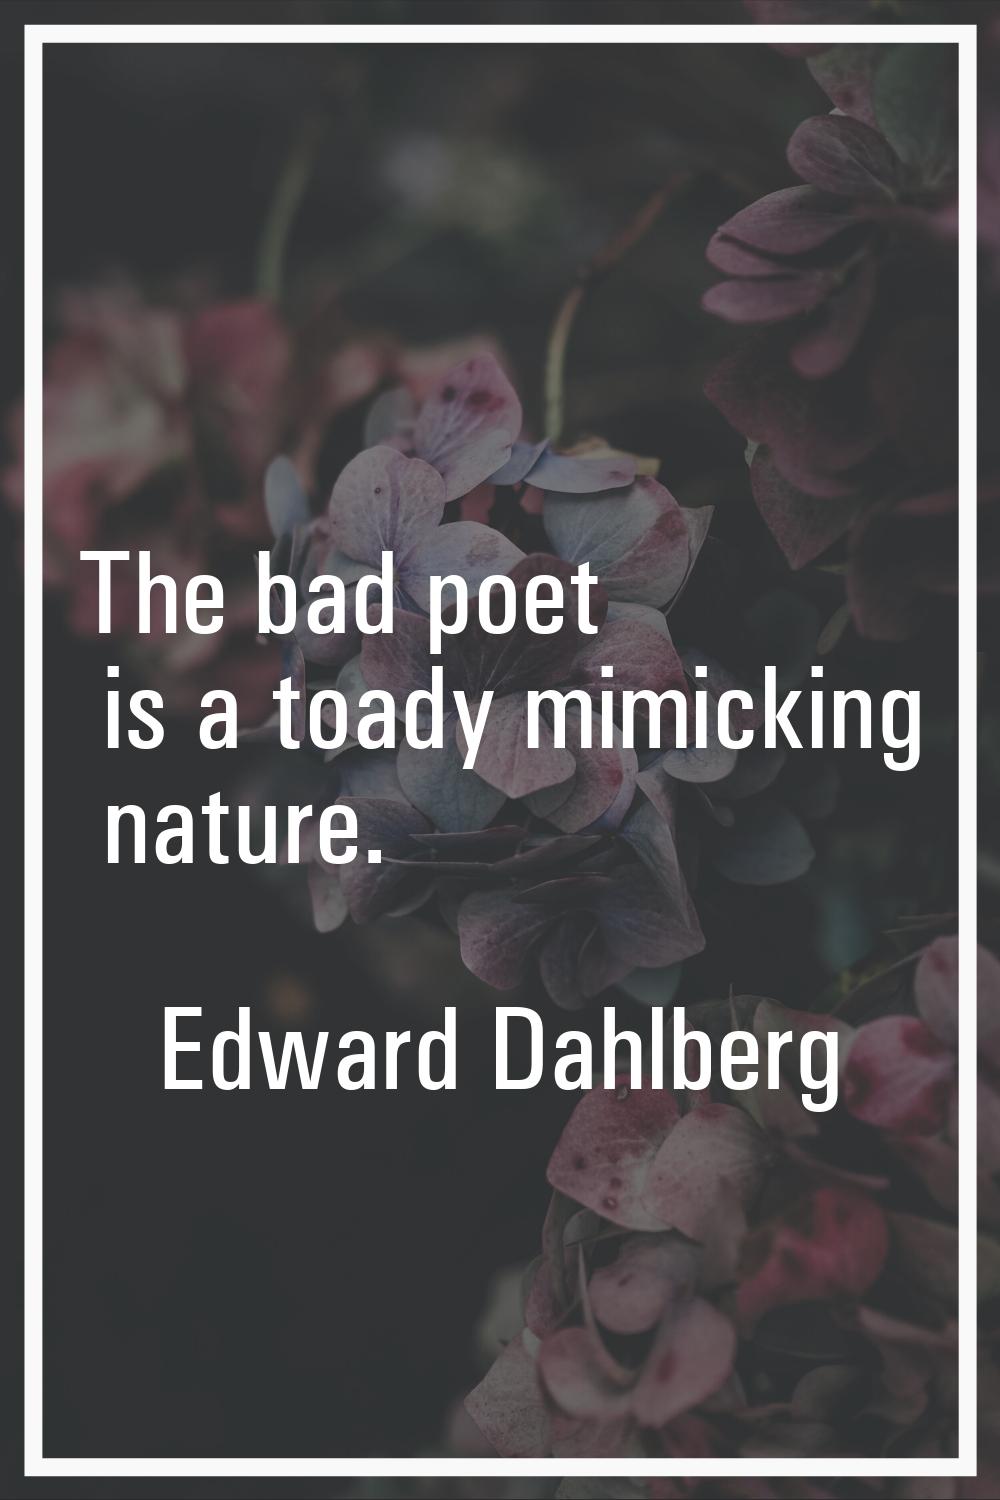 The bad poet is a toady mimicking nature.